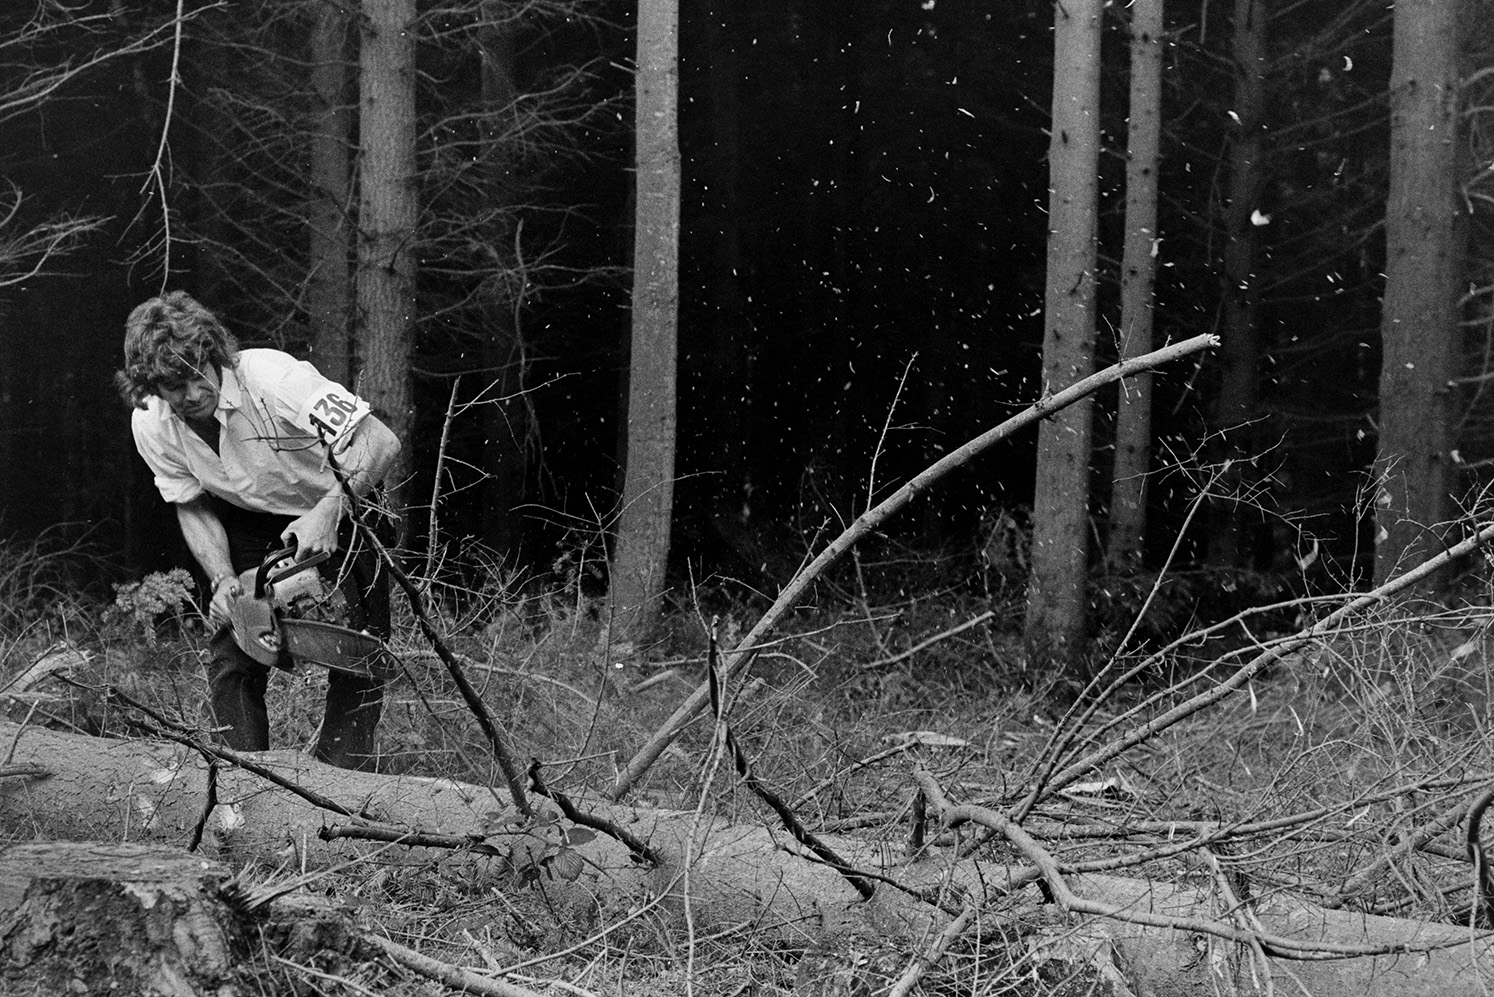 A Tree felling contest at Eggesford Forest. A man is cutting branches off a felled tree using a chainsaw. The competition was a prelude to the Devon County Show.